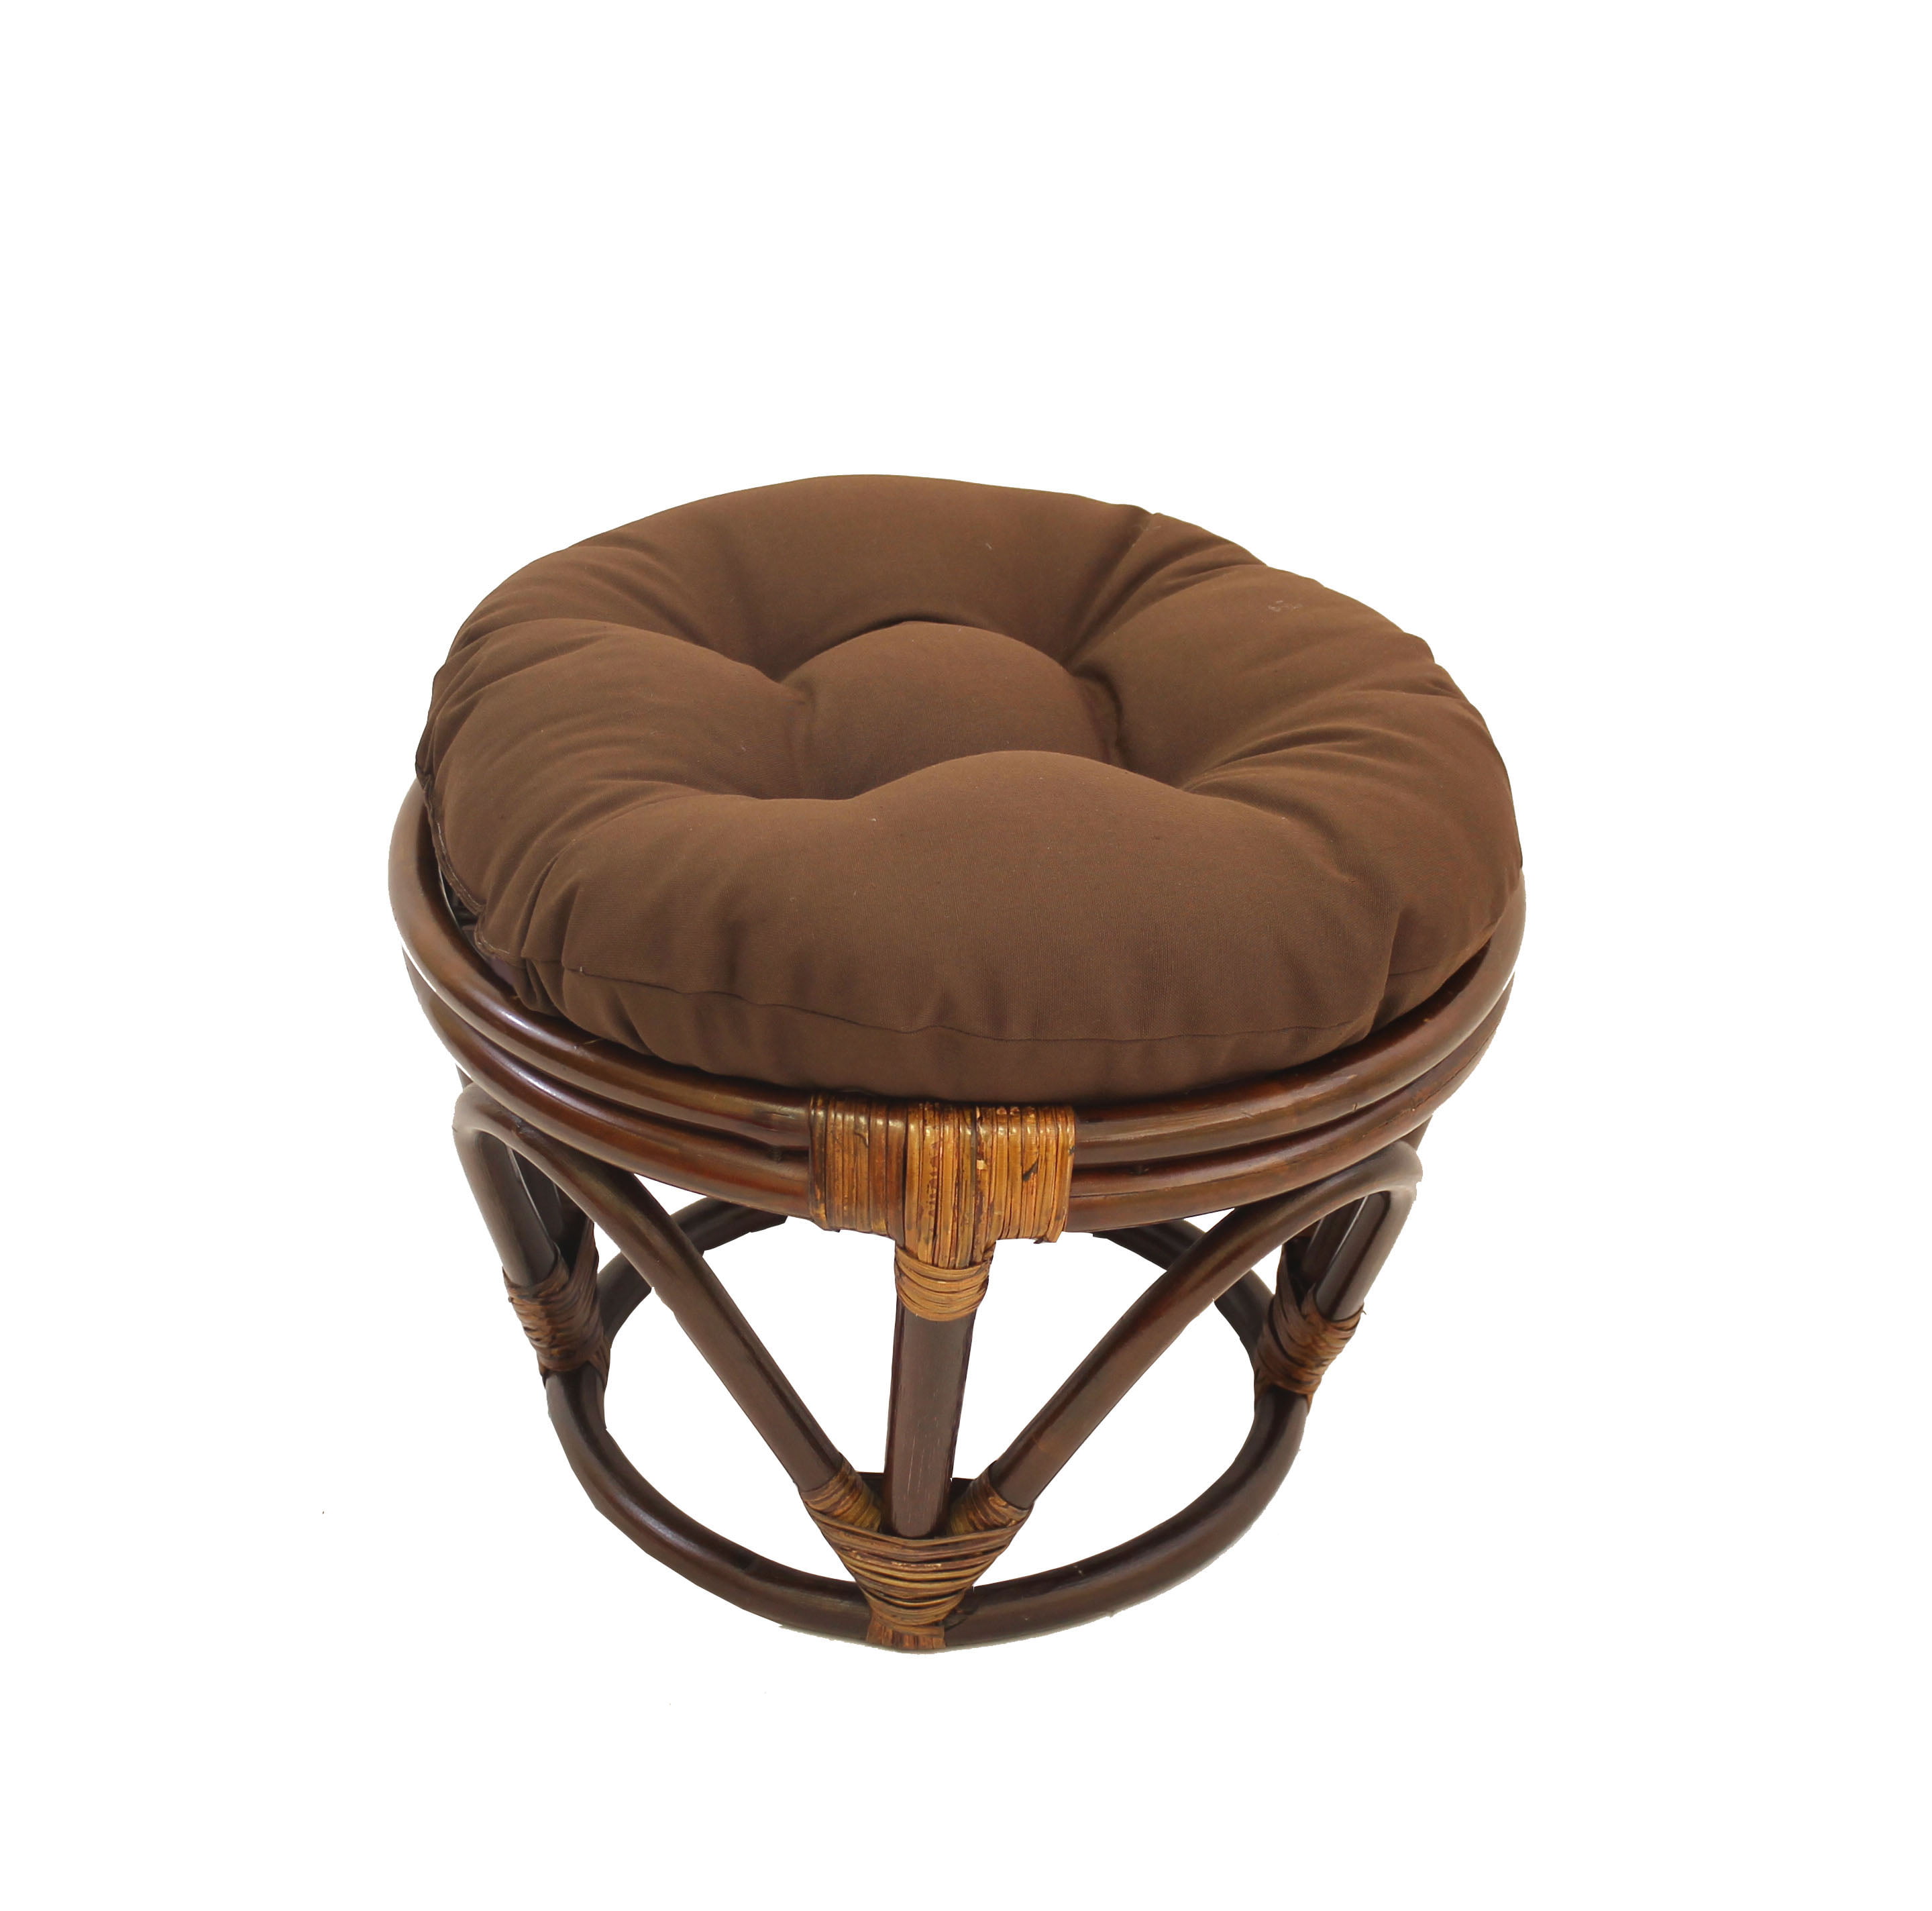 MISC 18 Inch Chocolate Brown Papasan Foot Stool Coastal Rattan Ottoman Round Microsuede Bohemian Frame with Padded Cushion Tufted Thick Pad 